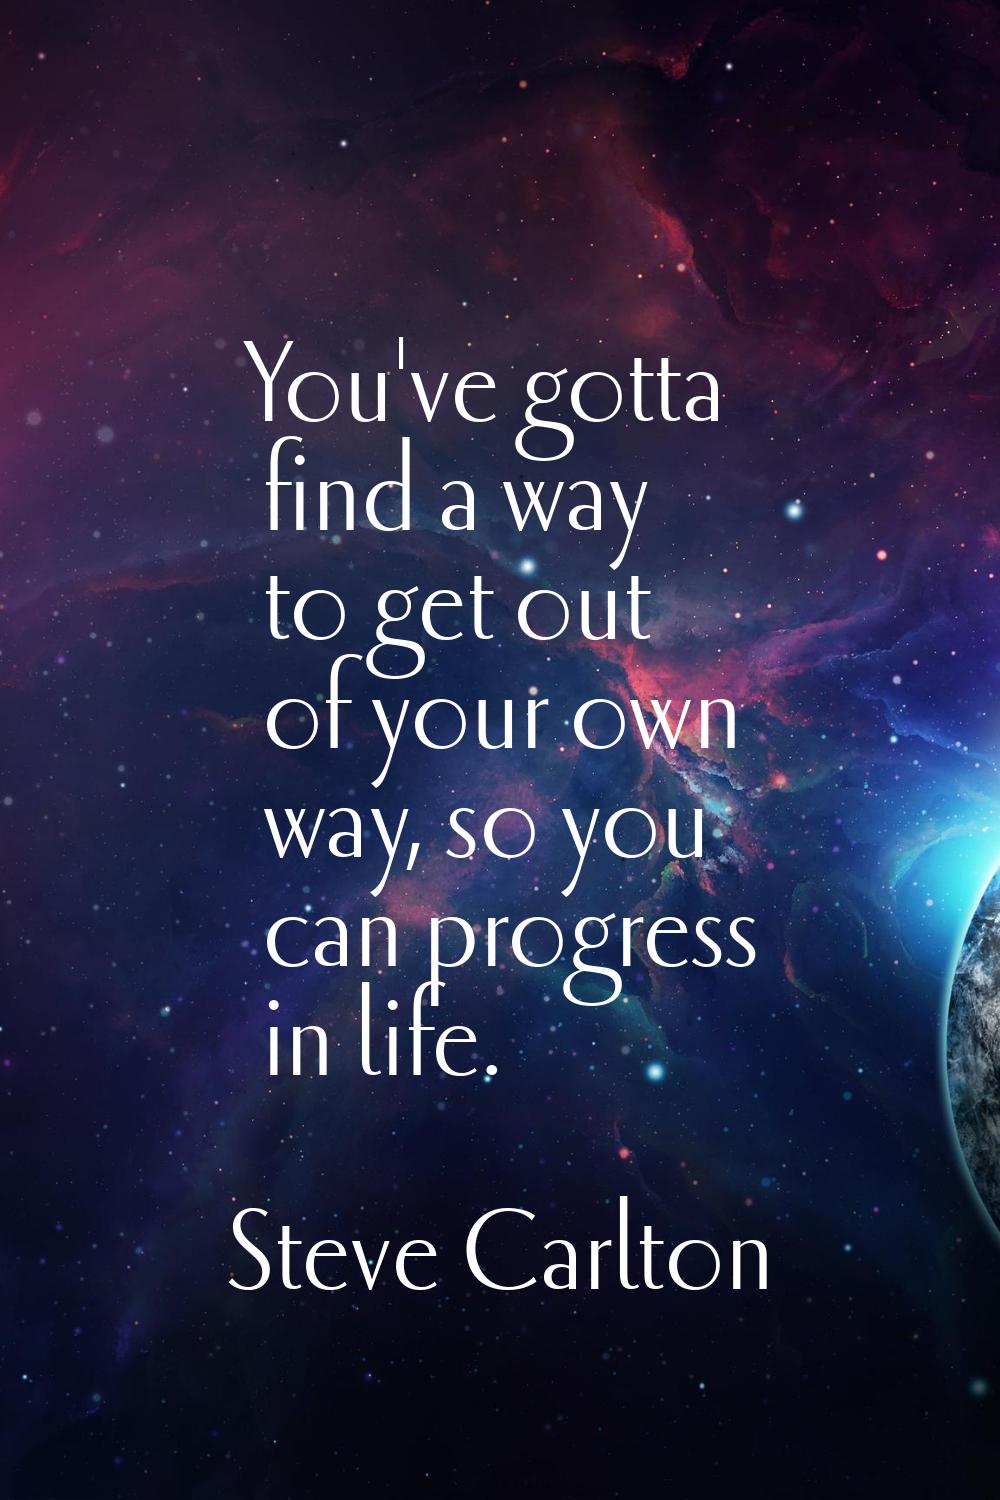 You've gotta find a way to get out of your own way, so you can progress in life.